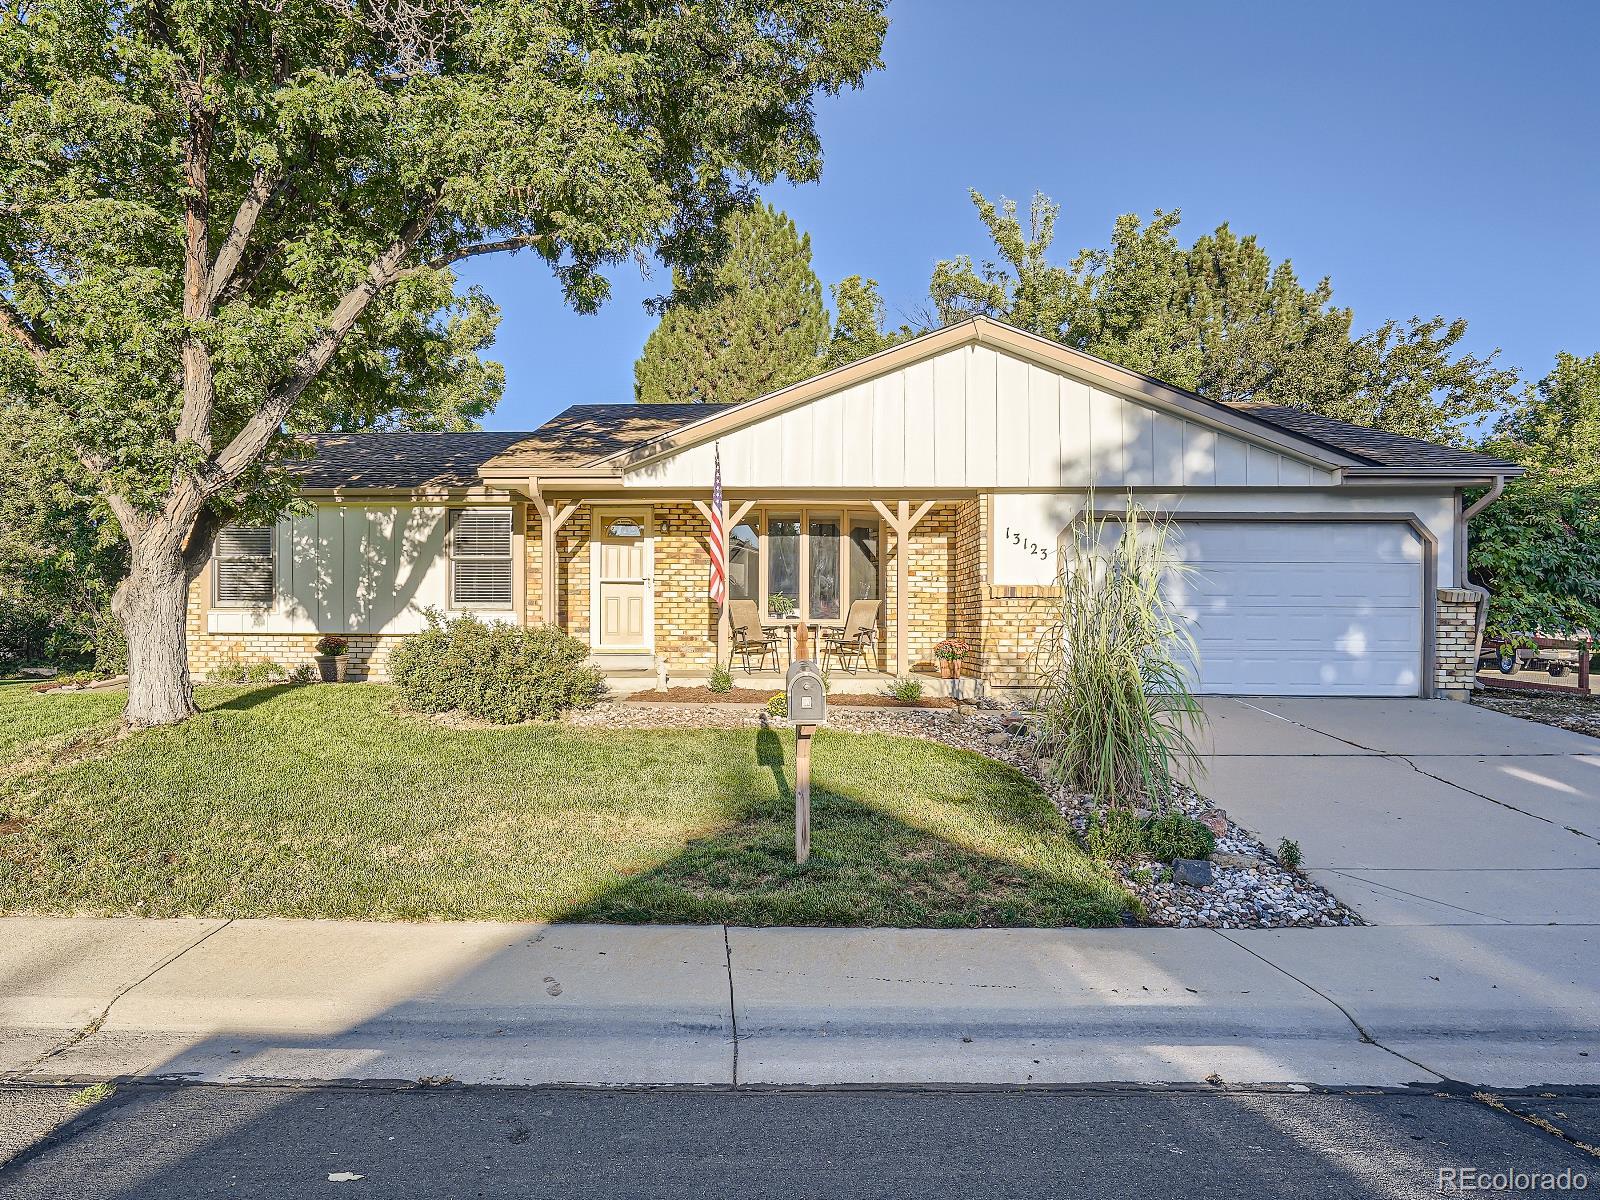 13123  fillmore street, Thornton sold home. Closed on 2024-01-26 for $520,000.